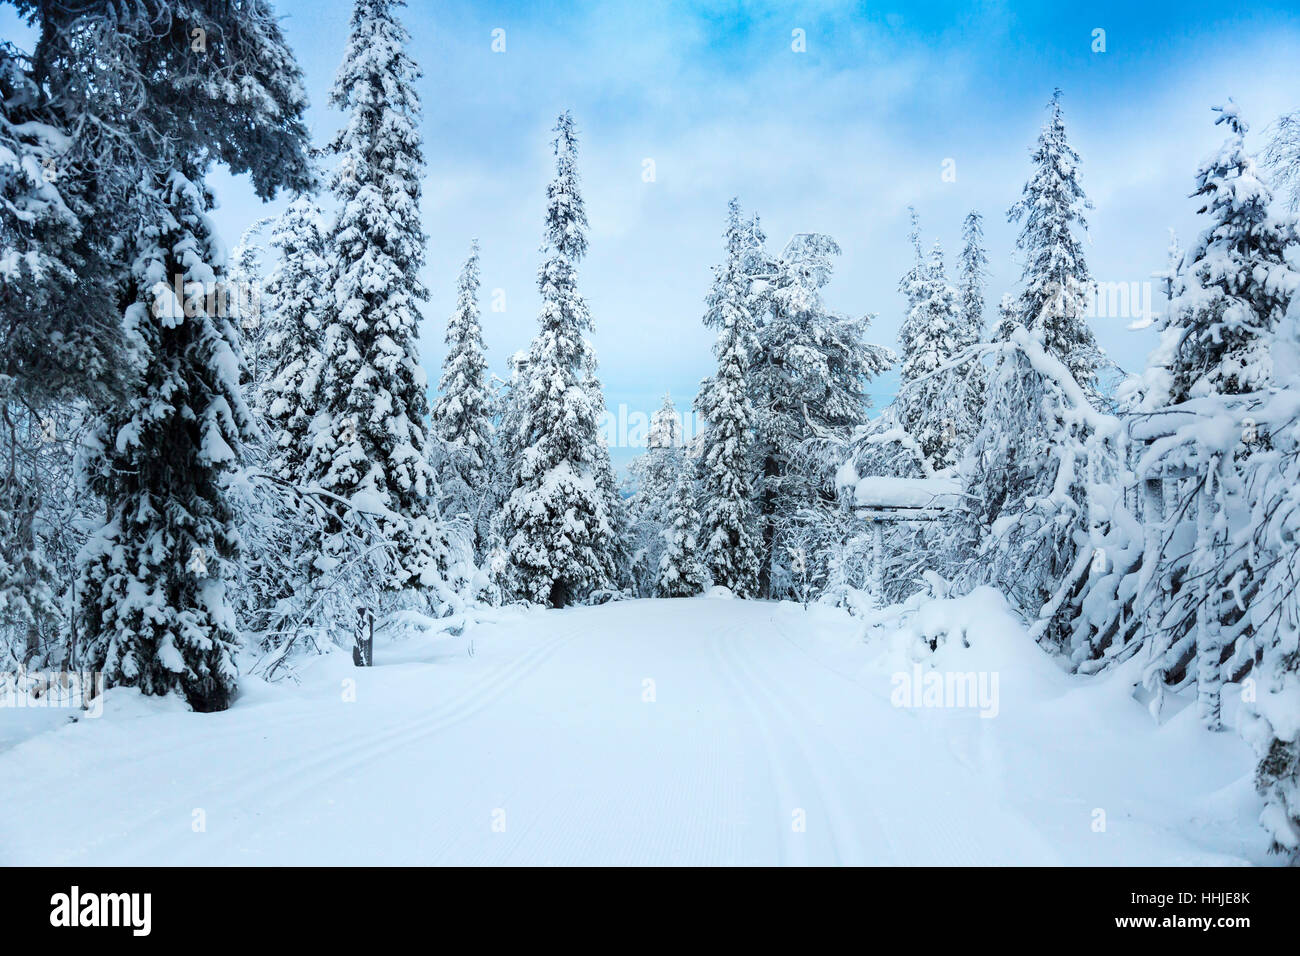 beautiful snowy forest landscape in Finland, Lapland Stock Photo